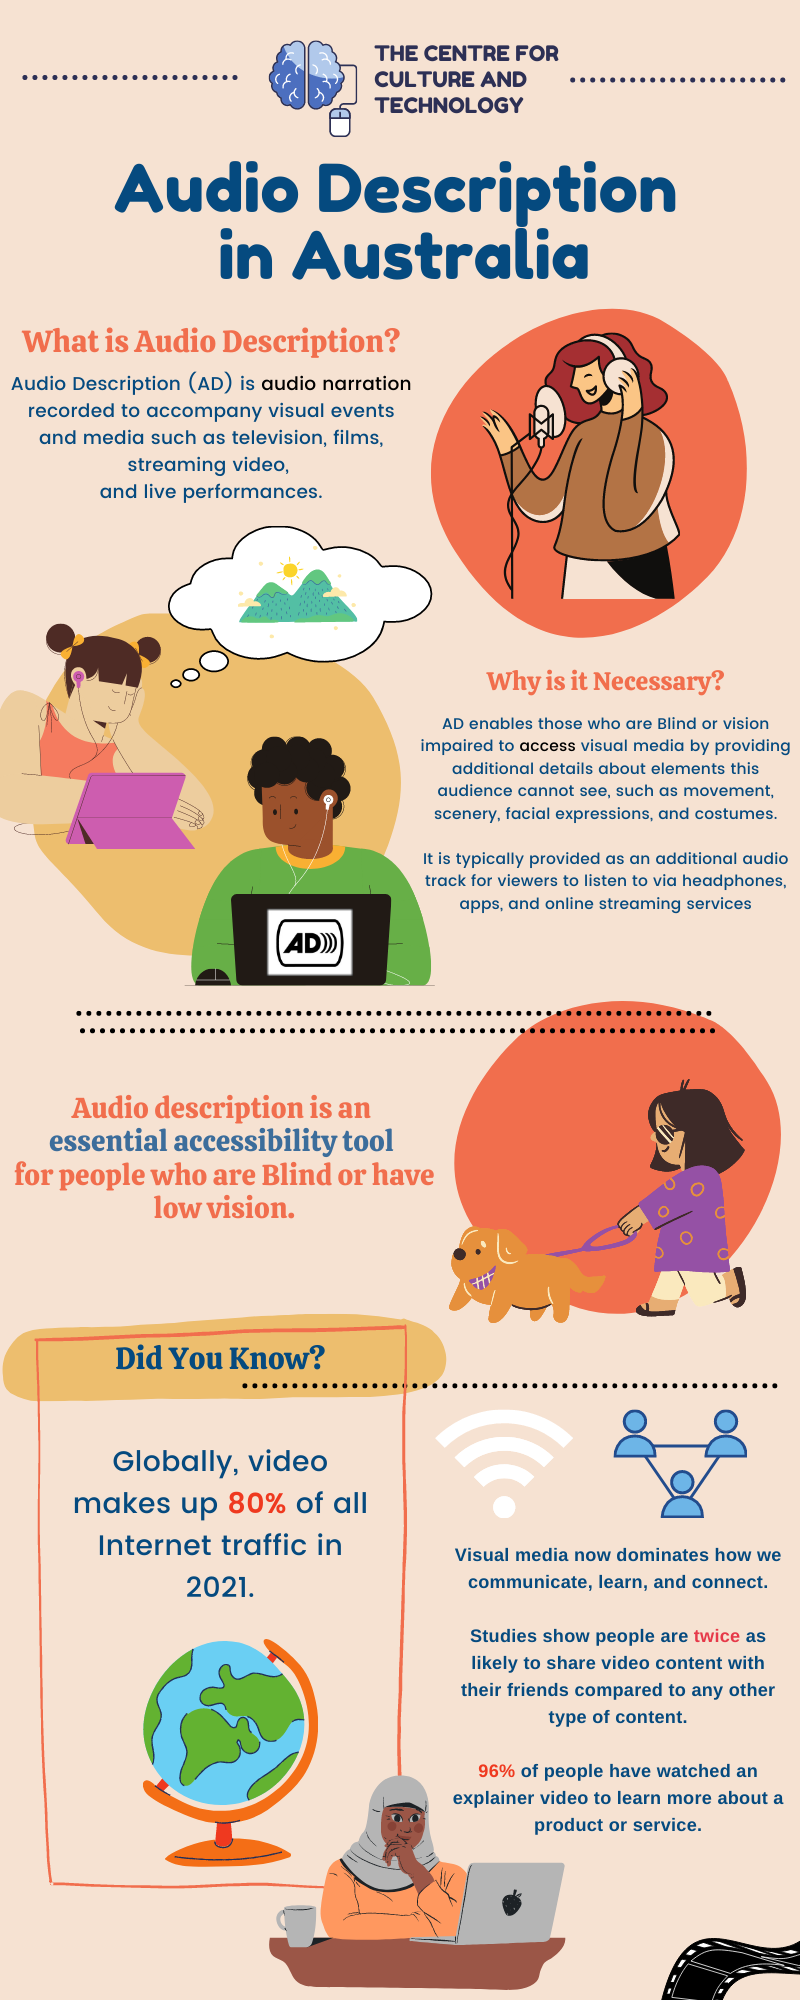 Infographic page 1. Title: Audio Description in Australia. A montage of bright cartoon style images run down the page, depicting people using laptops and listening to headphones. A woman walks with her guide dog, and another speaks into a microphone, recording AD. Image text: What is Audio Description? Audio Description (AD) is audio narration recorded to accompany visual events and media such as television, films, streaming video, and live performances. Why is it necessary? AD enables those who are Blind or vision impaired to access visual media by providing additional details about elements this audience cannot see, such as movement, scenery, facial expressions, and costumes. It is typically provided as an additional audio track for viewers to listen to via headphones, apps, and online streaming services. Audio description is an essential accessibility tool for people who are Blind or have low vision. Did you know? Globally, video makes up 80% of all Internet traffic in 2021. Visual media now dominates how we communicate, learn, and connect. Studies show people are twice as likely to share video content with their friends compared to any other type of content. 96% of people have watched an explainer video to learn more about a product or service.